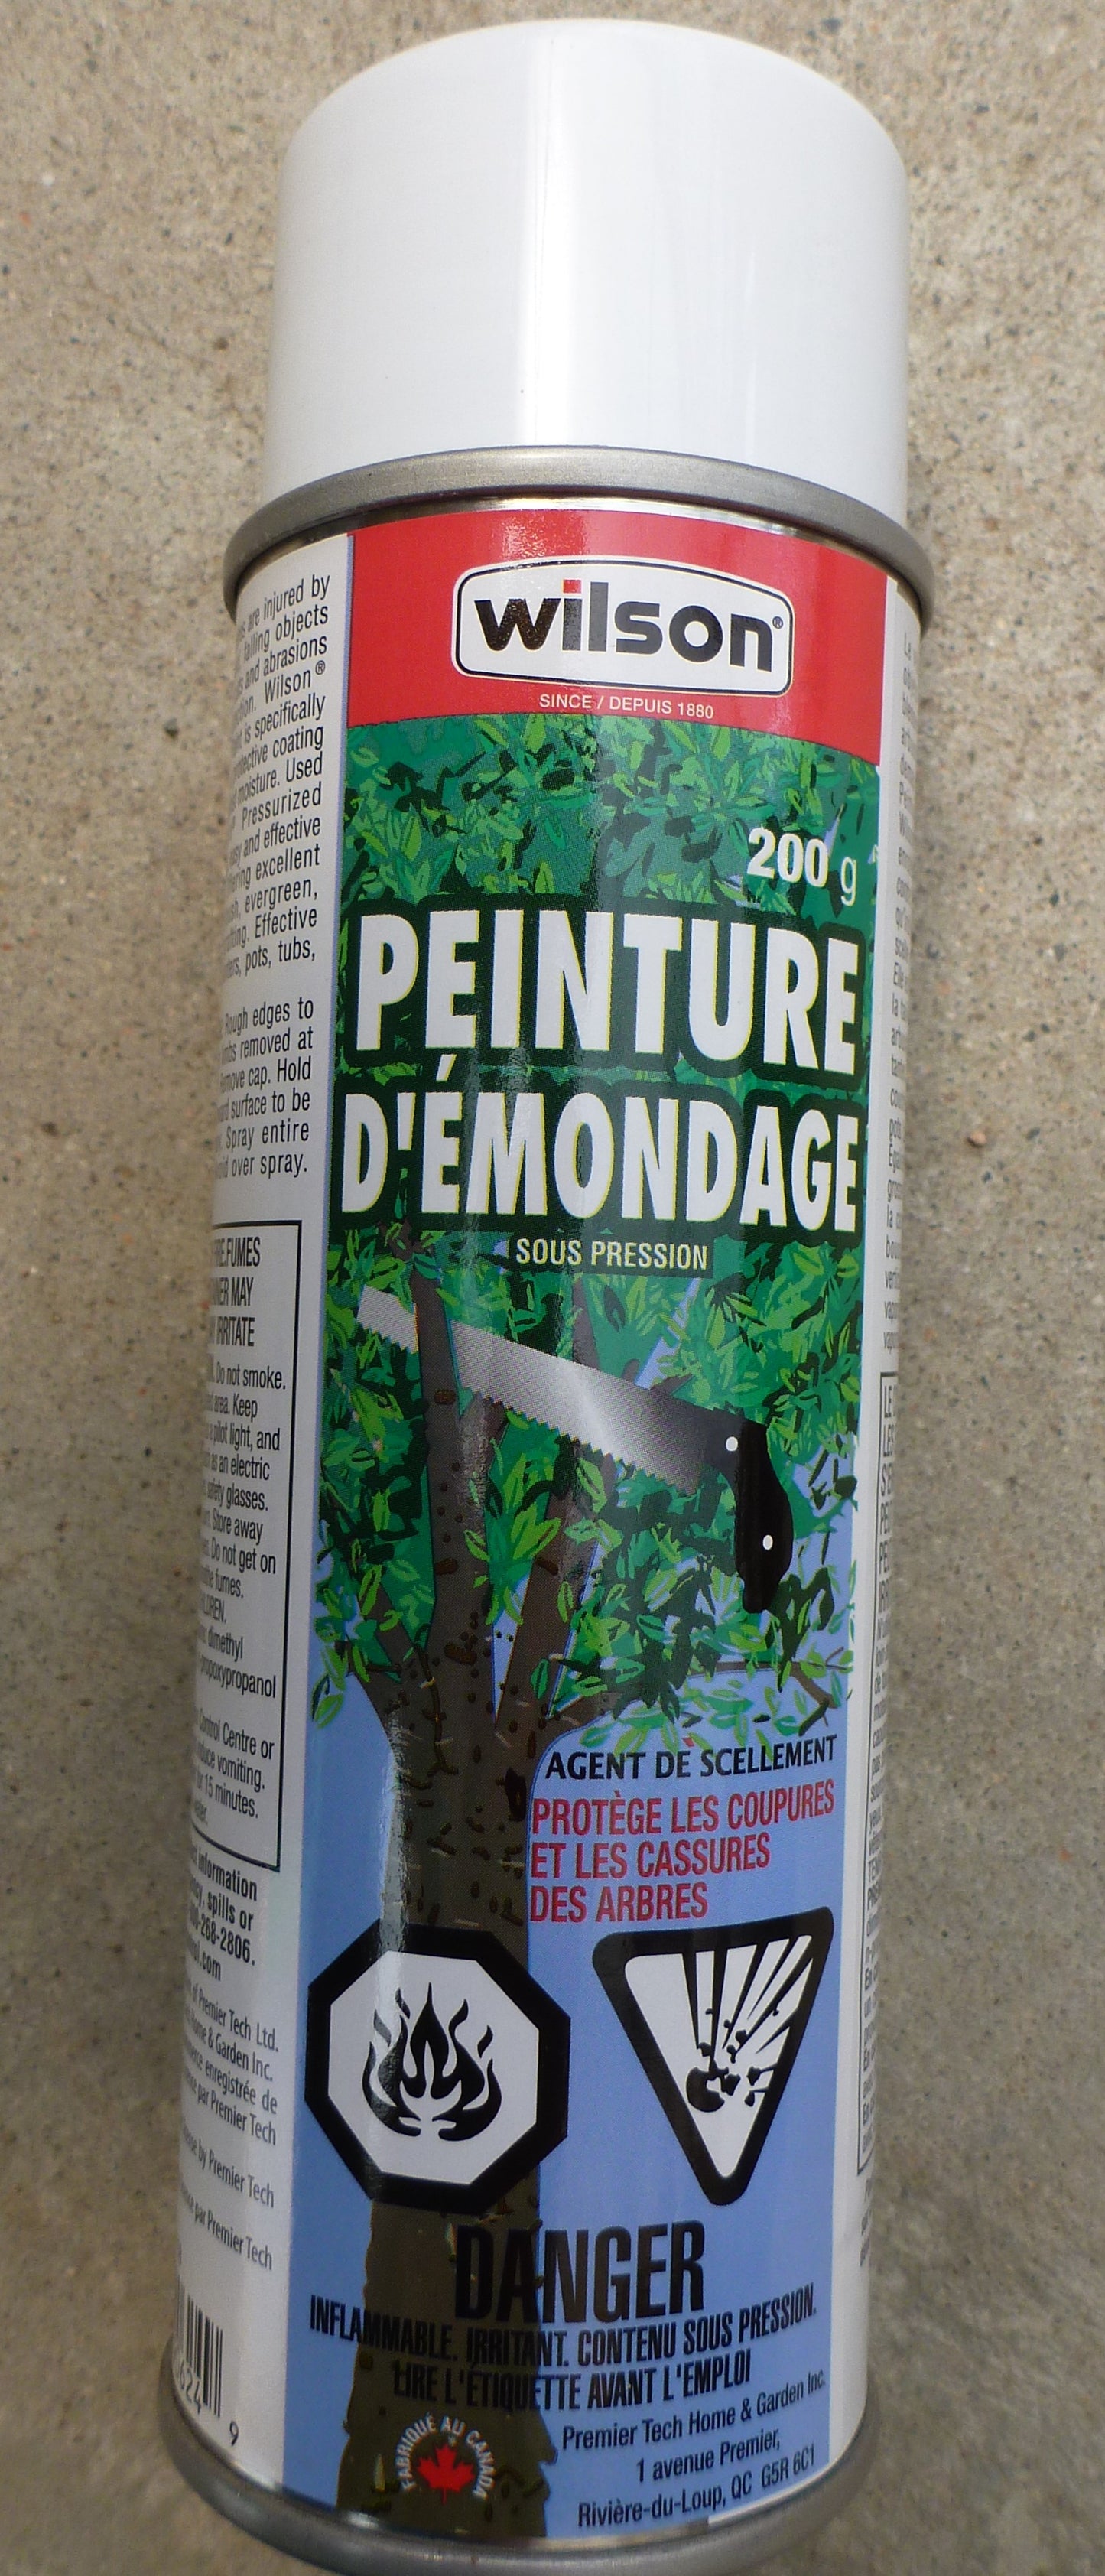 Pruning Paint 200g